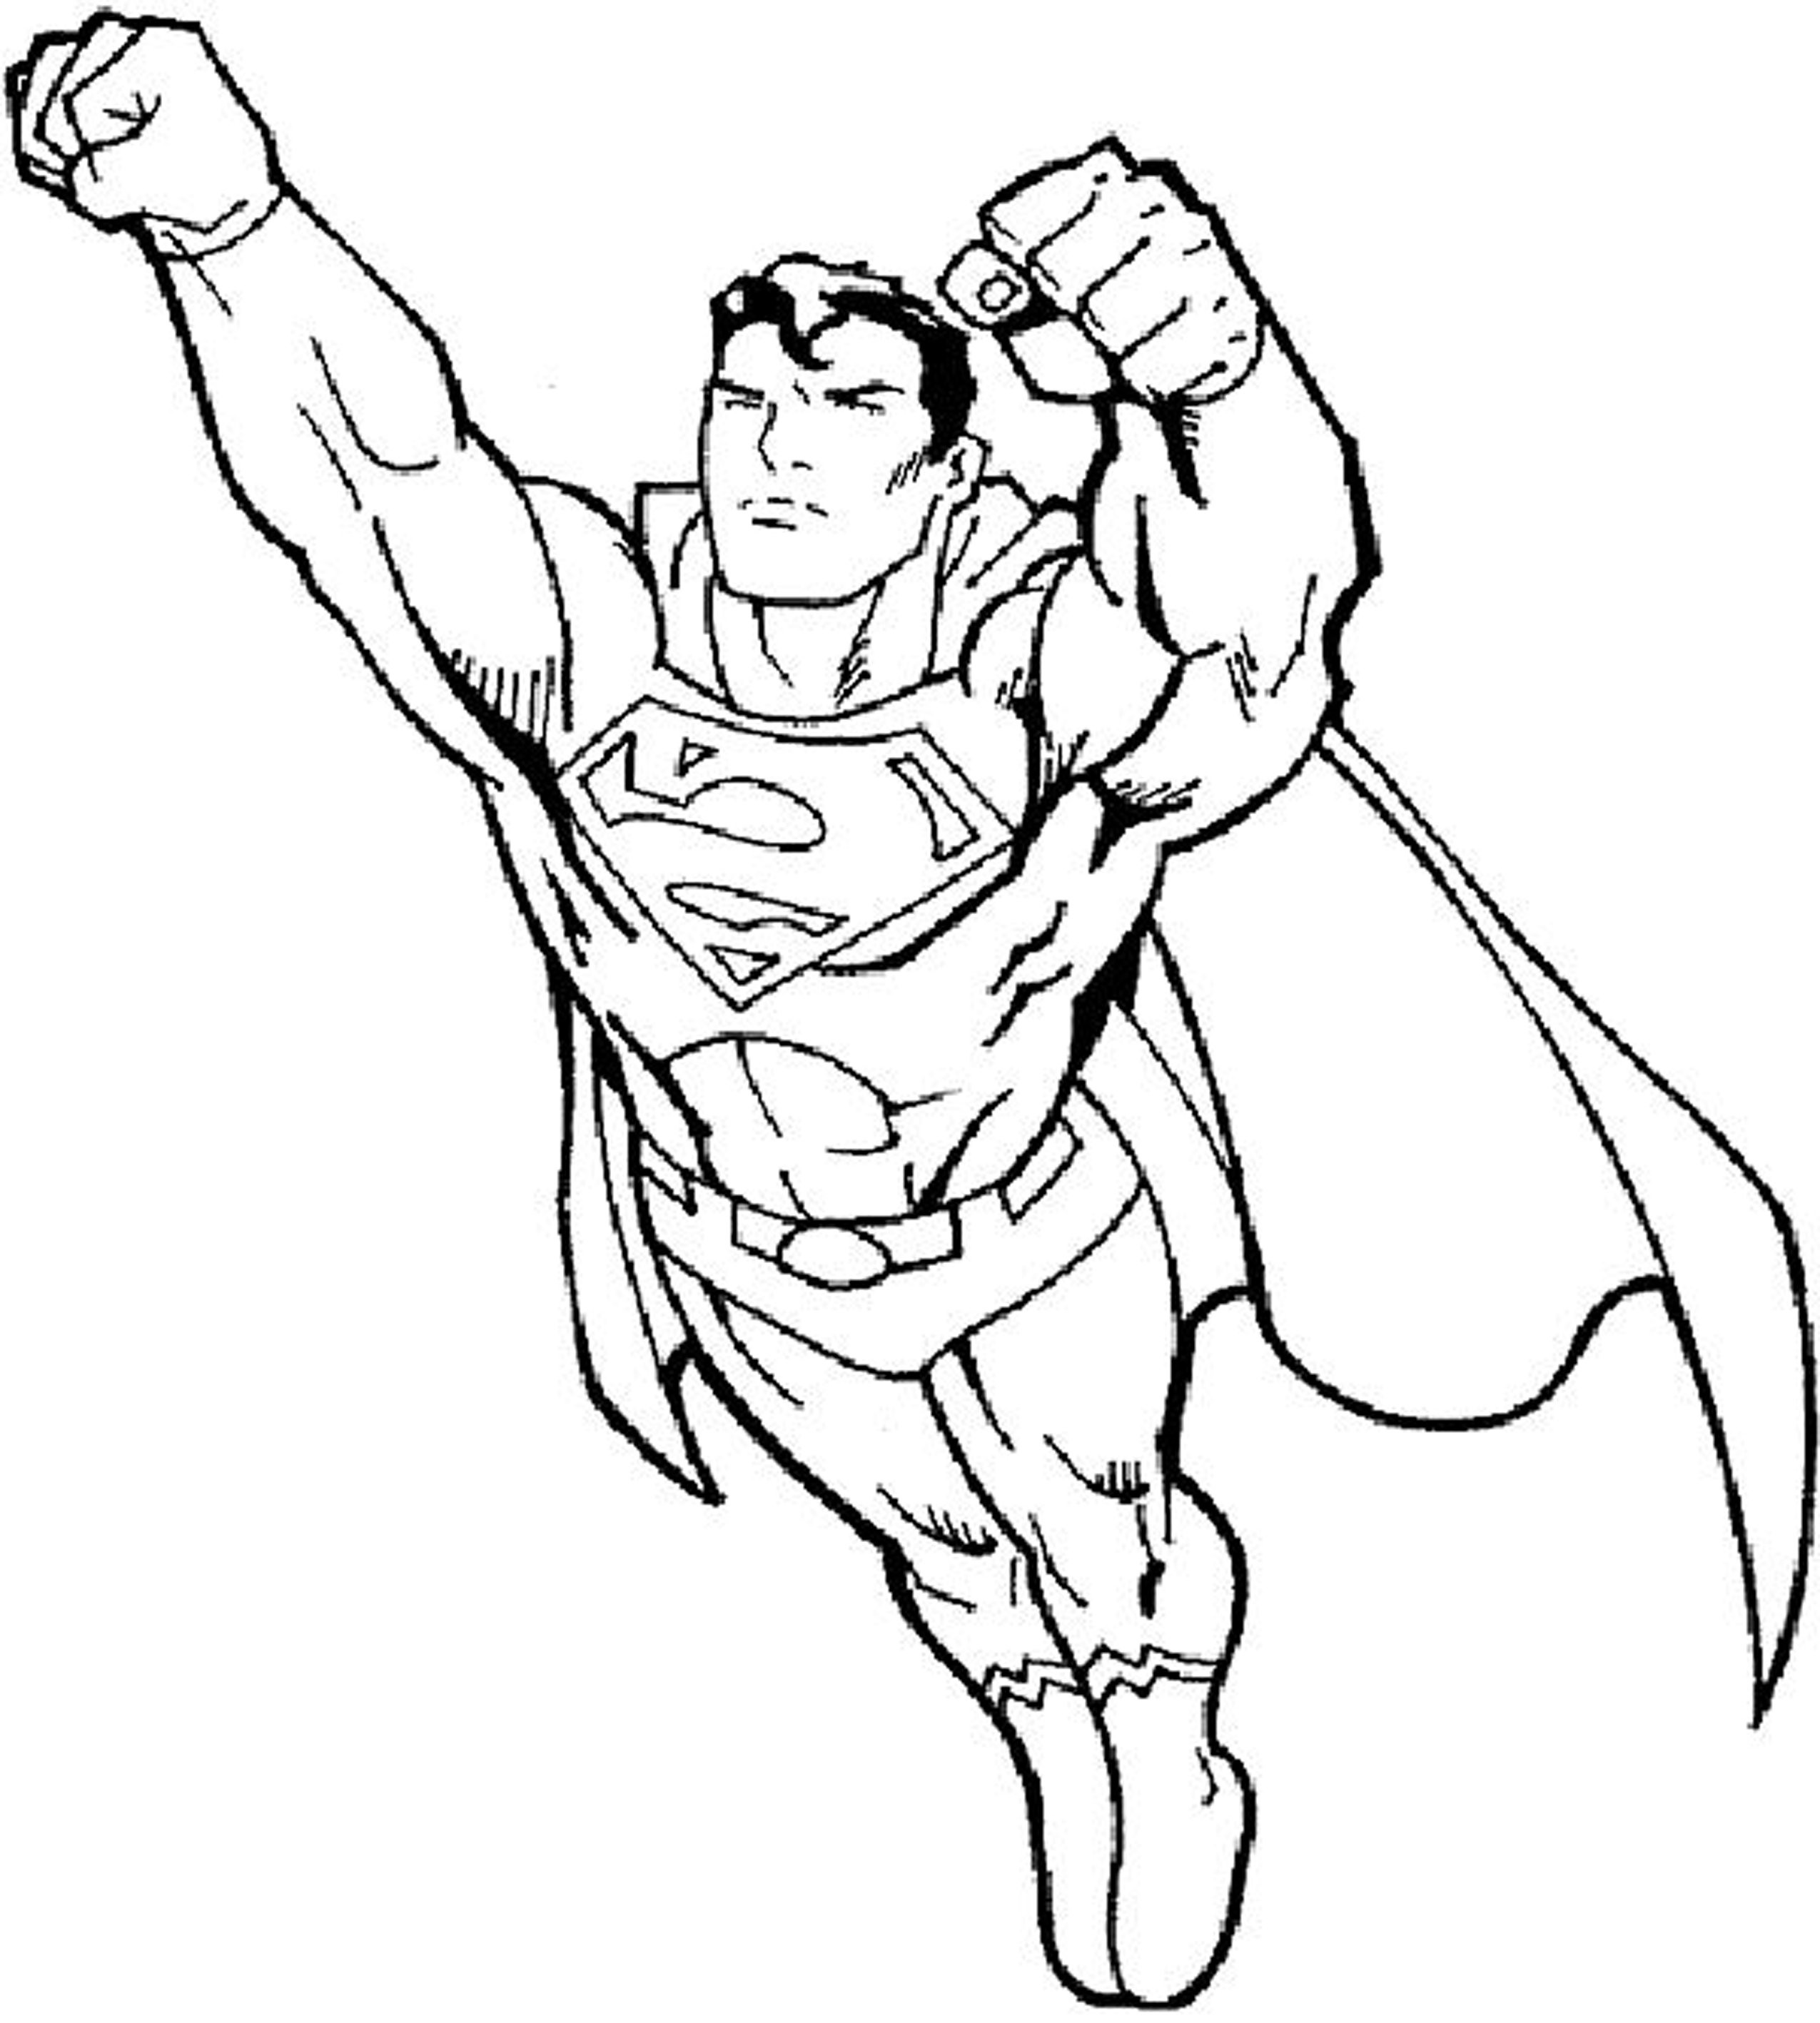 Free Coloring Sheets Boys
 Coloring Pages Free Printable Coloring Pages For Boys